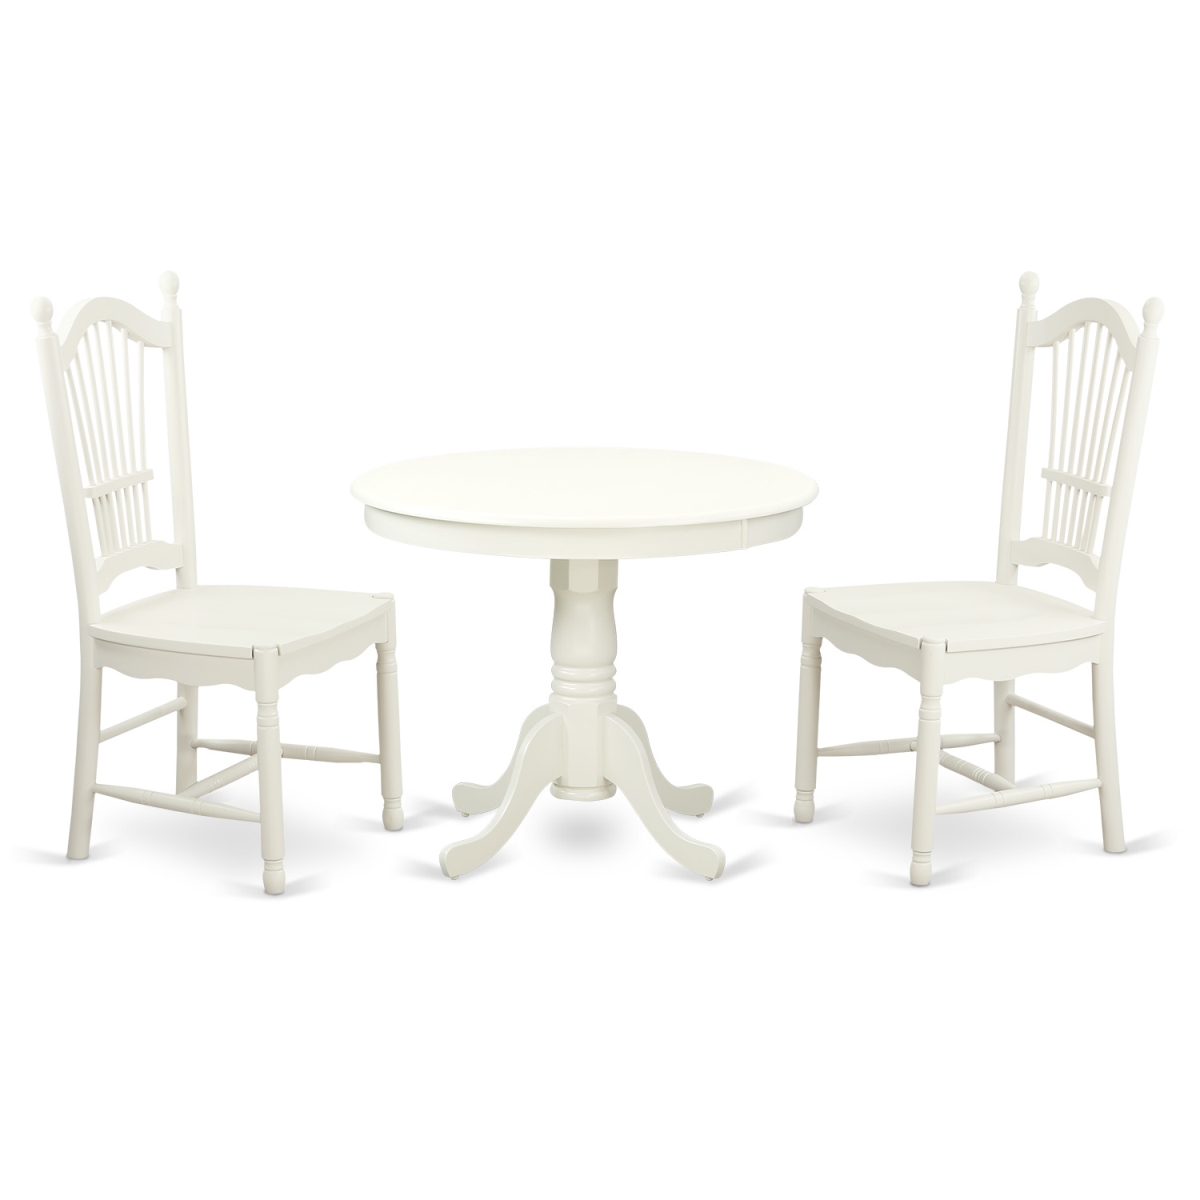 Picture of East West Furniture ANDO3-LWH-W Dining Set - One Round Table & Two Wood Seat Chairs, Linen White - 36 in. - 3 Piece